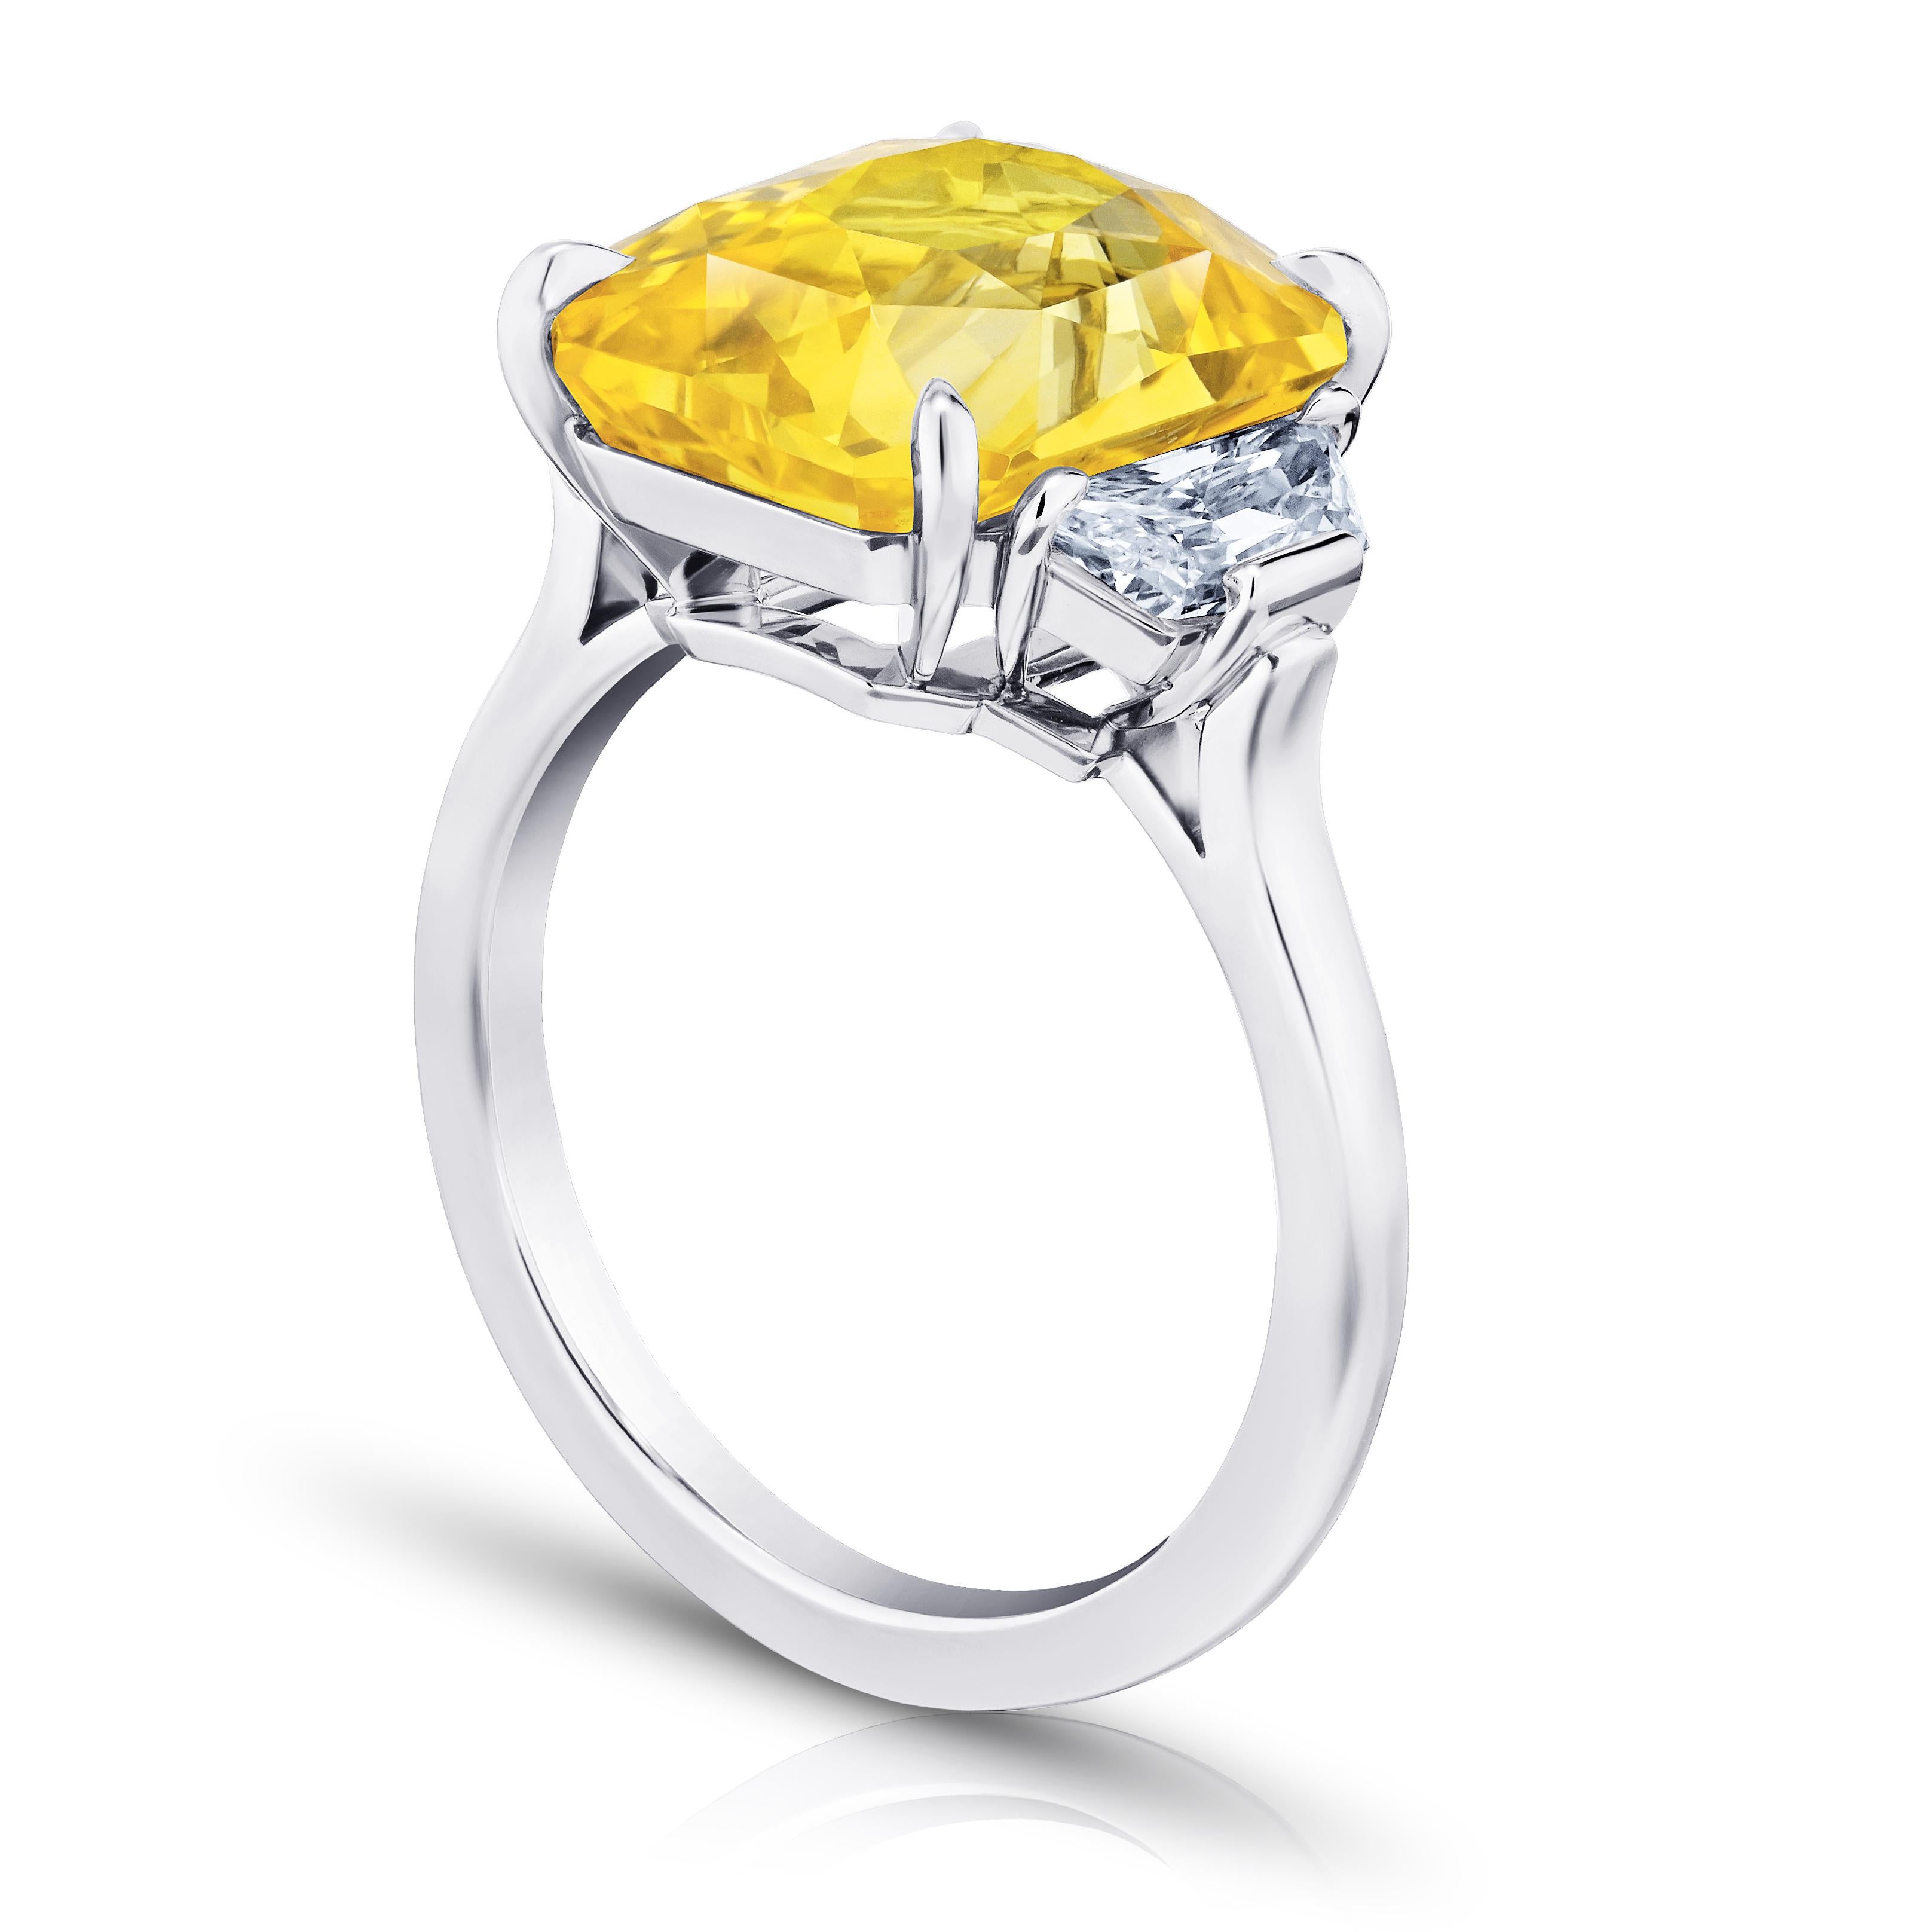 9.08 CT Radiant Yellow Sapphire with Trapezoid Diamonds 0.82 carats set in a Platinum Ring